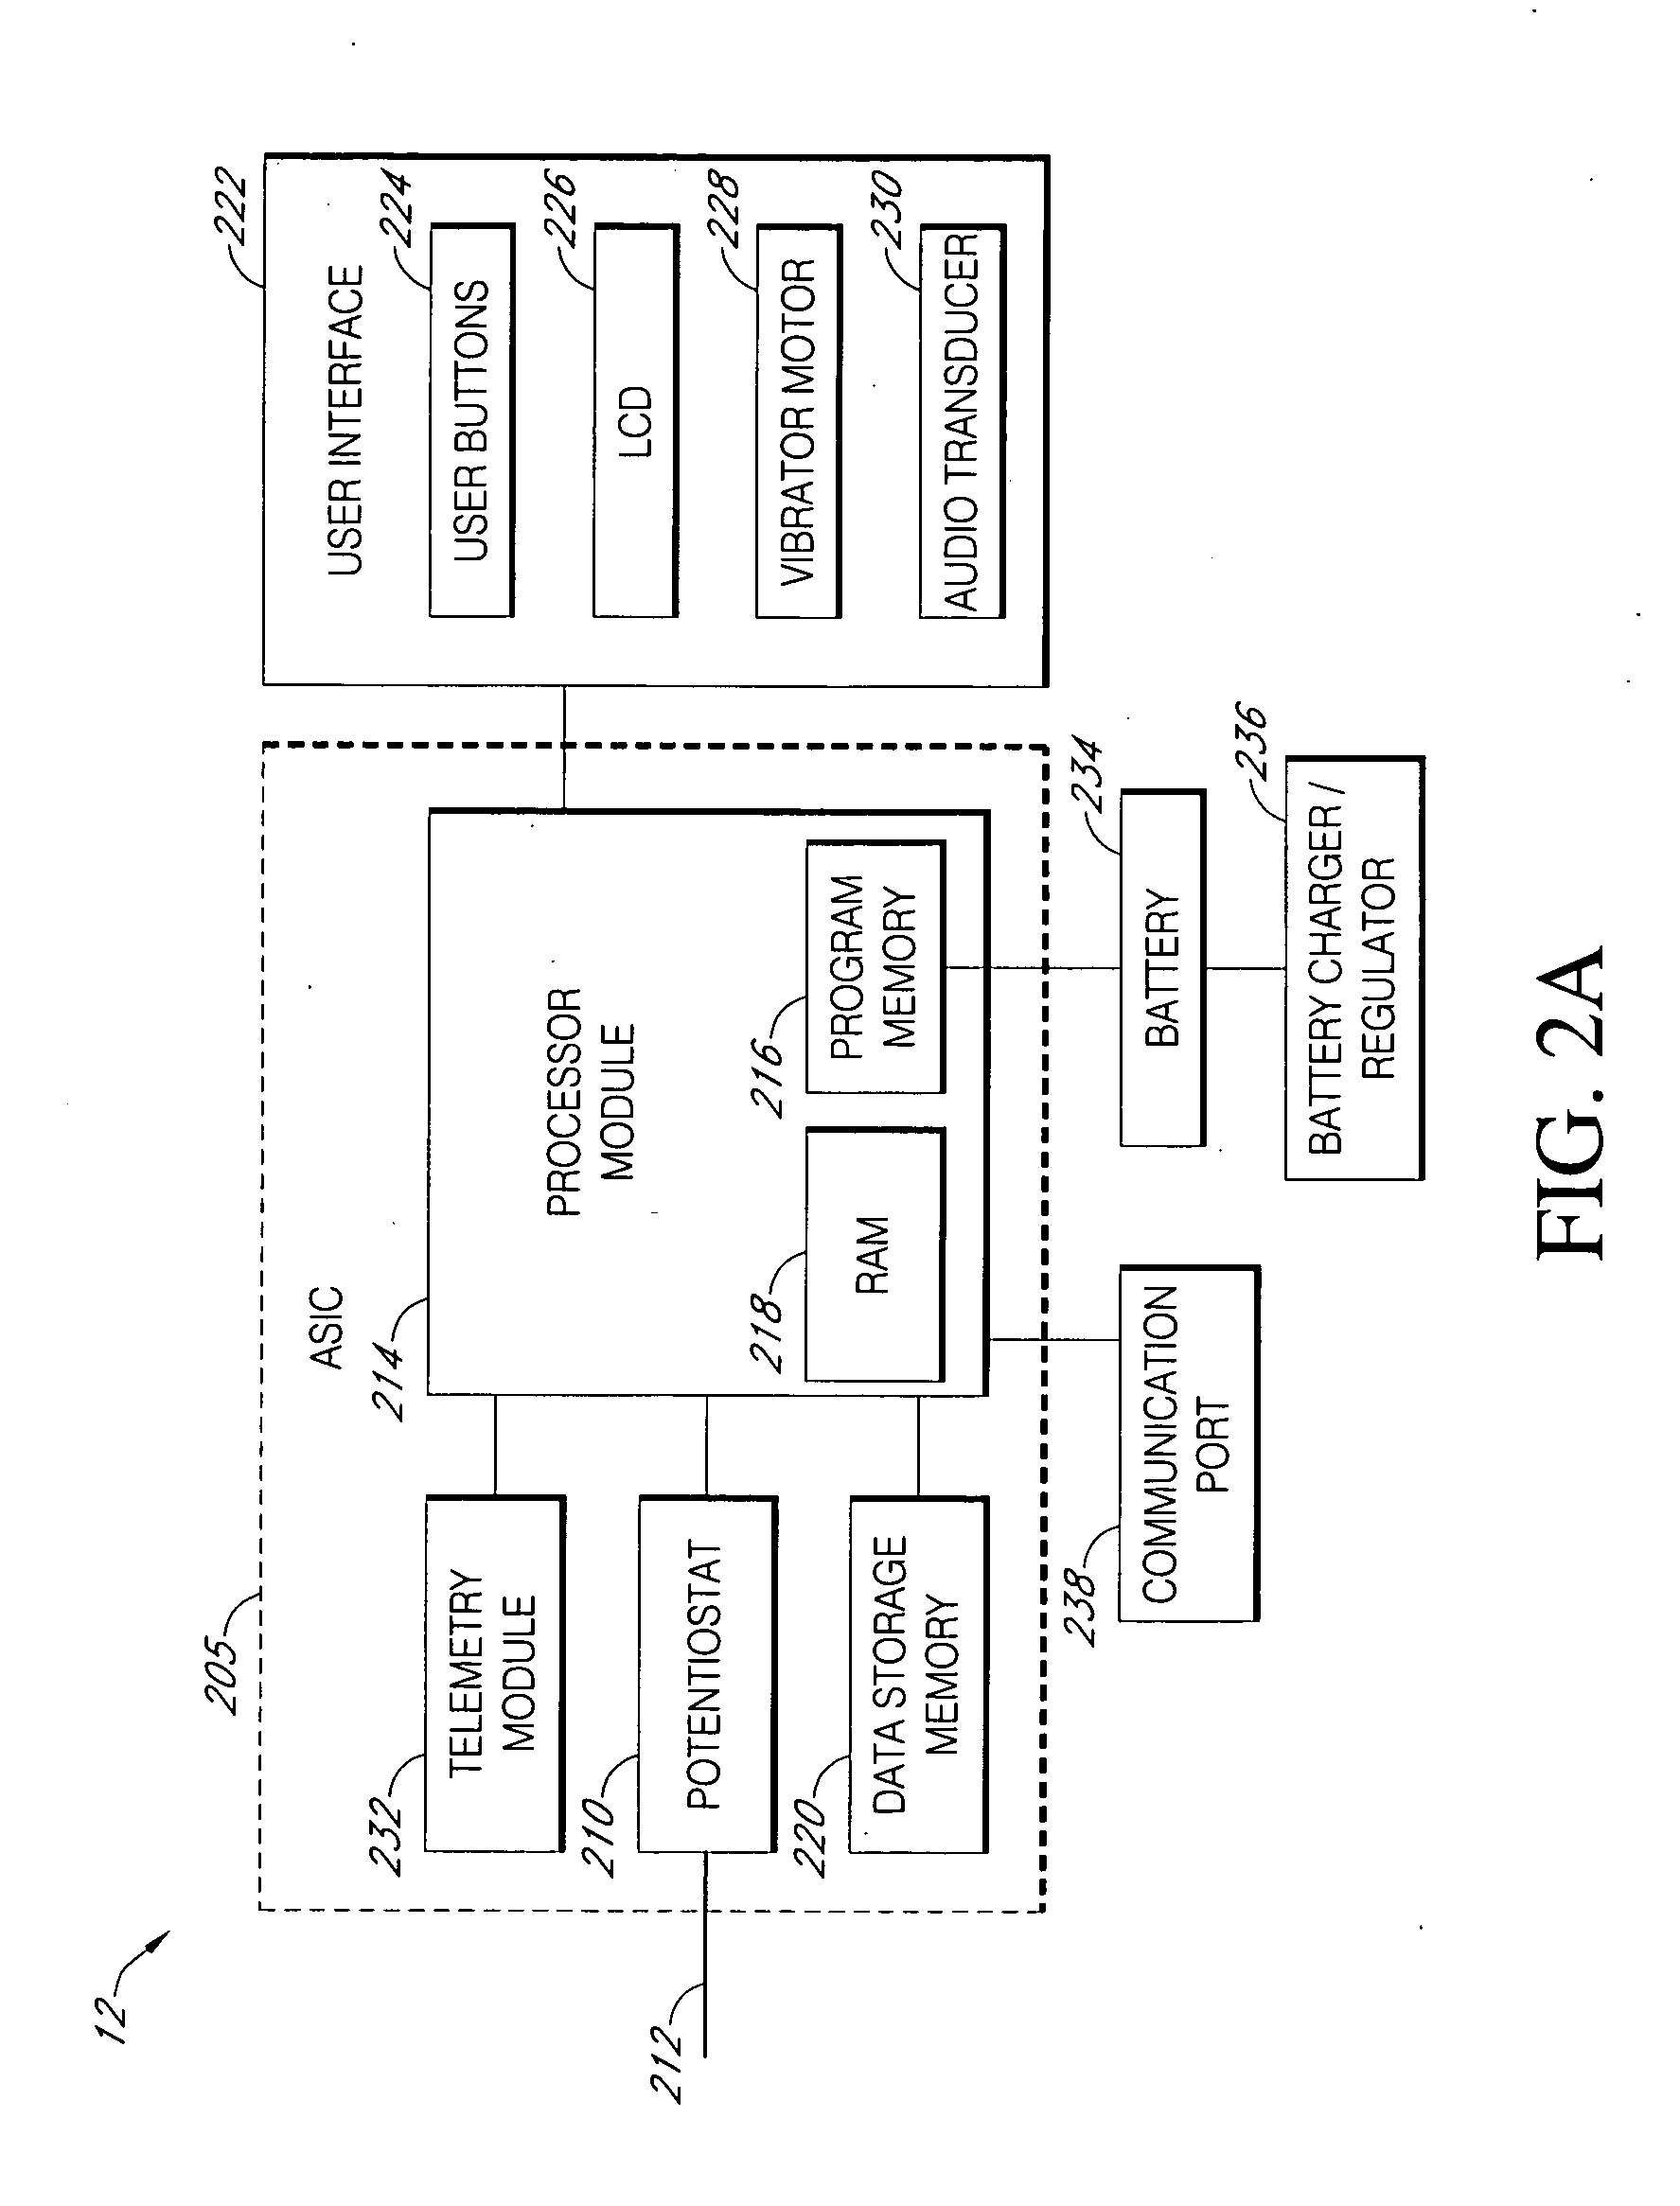 Systems and methods for blood glucose monitoring and alert delivery